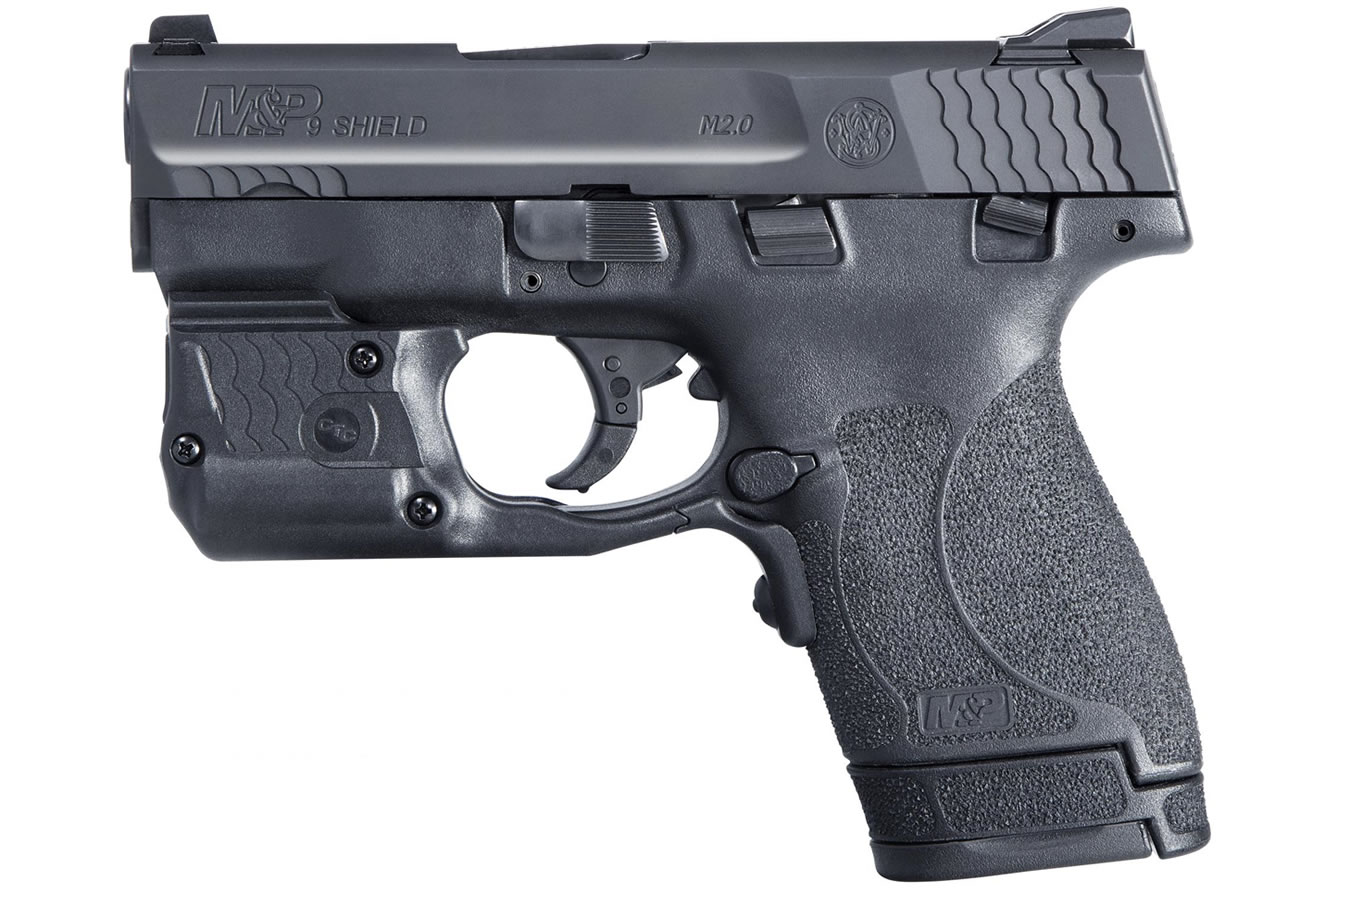 SMITH AND WESSON MP9 SHIELD M2.0 9MM LASERGUARD PRO COMBO